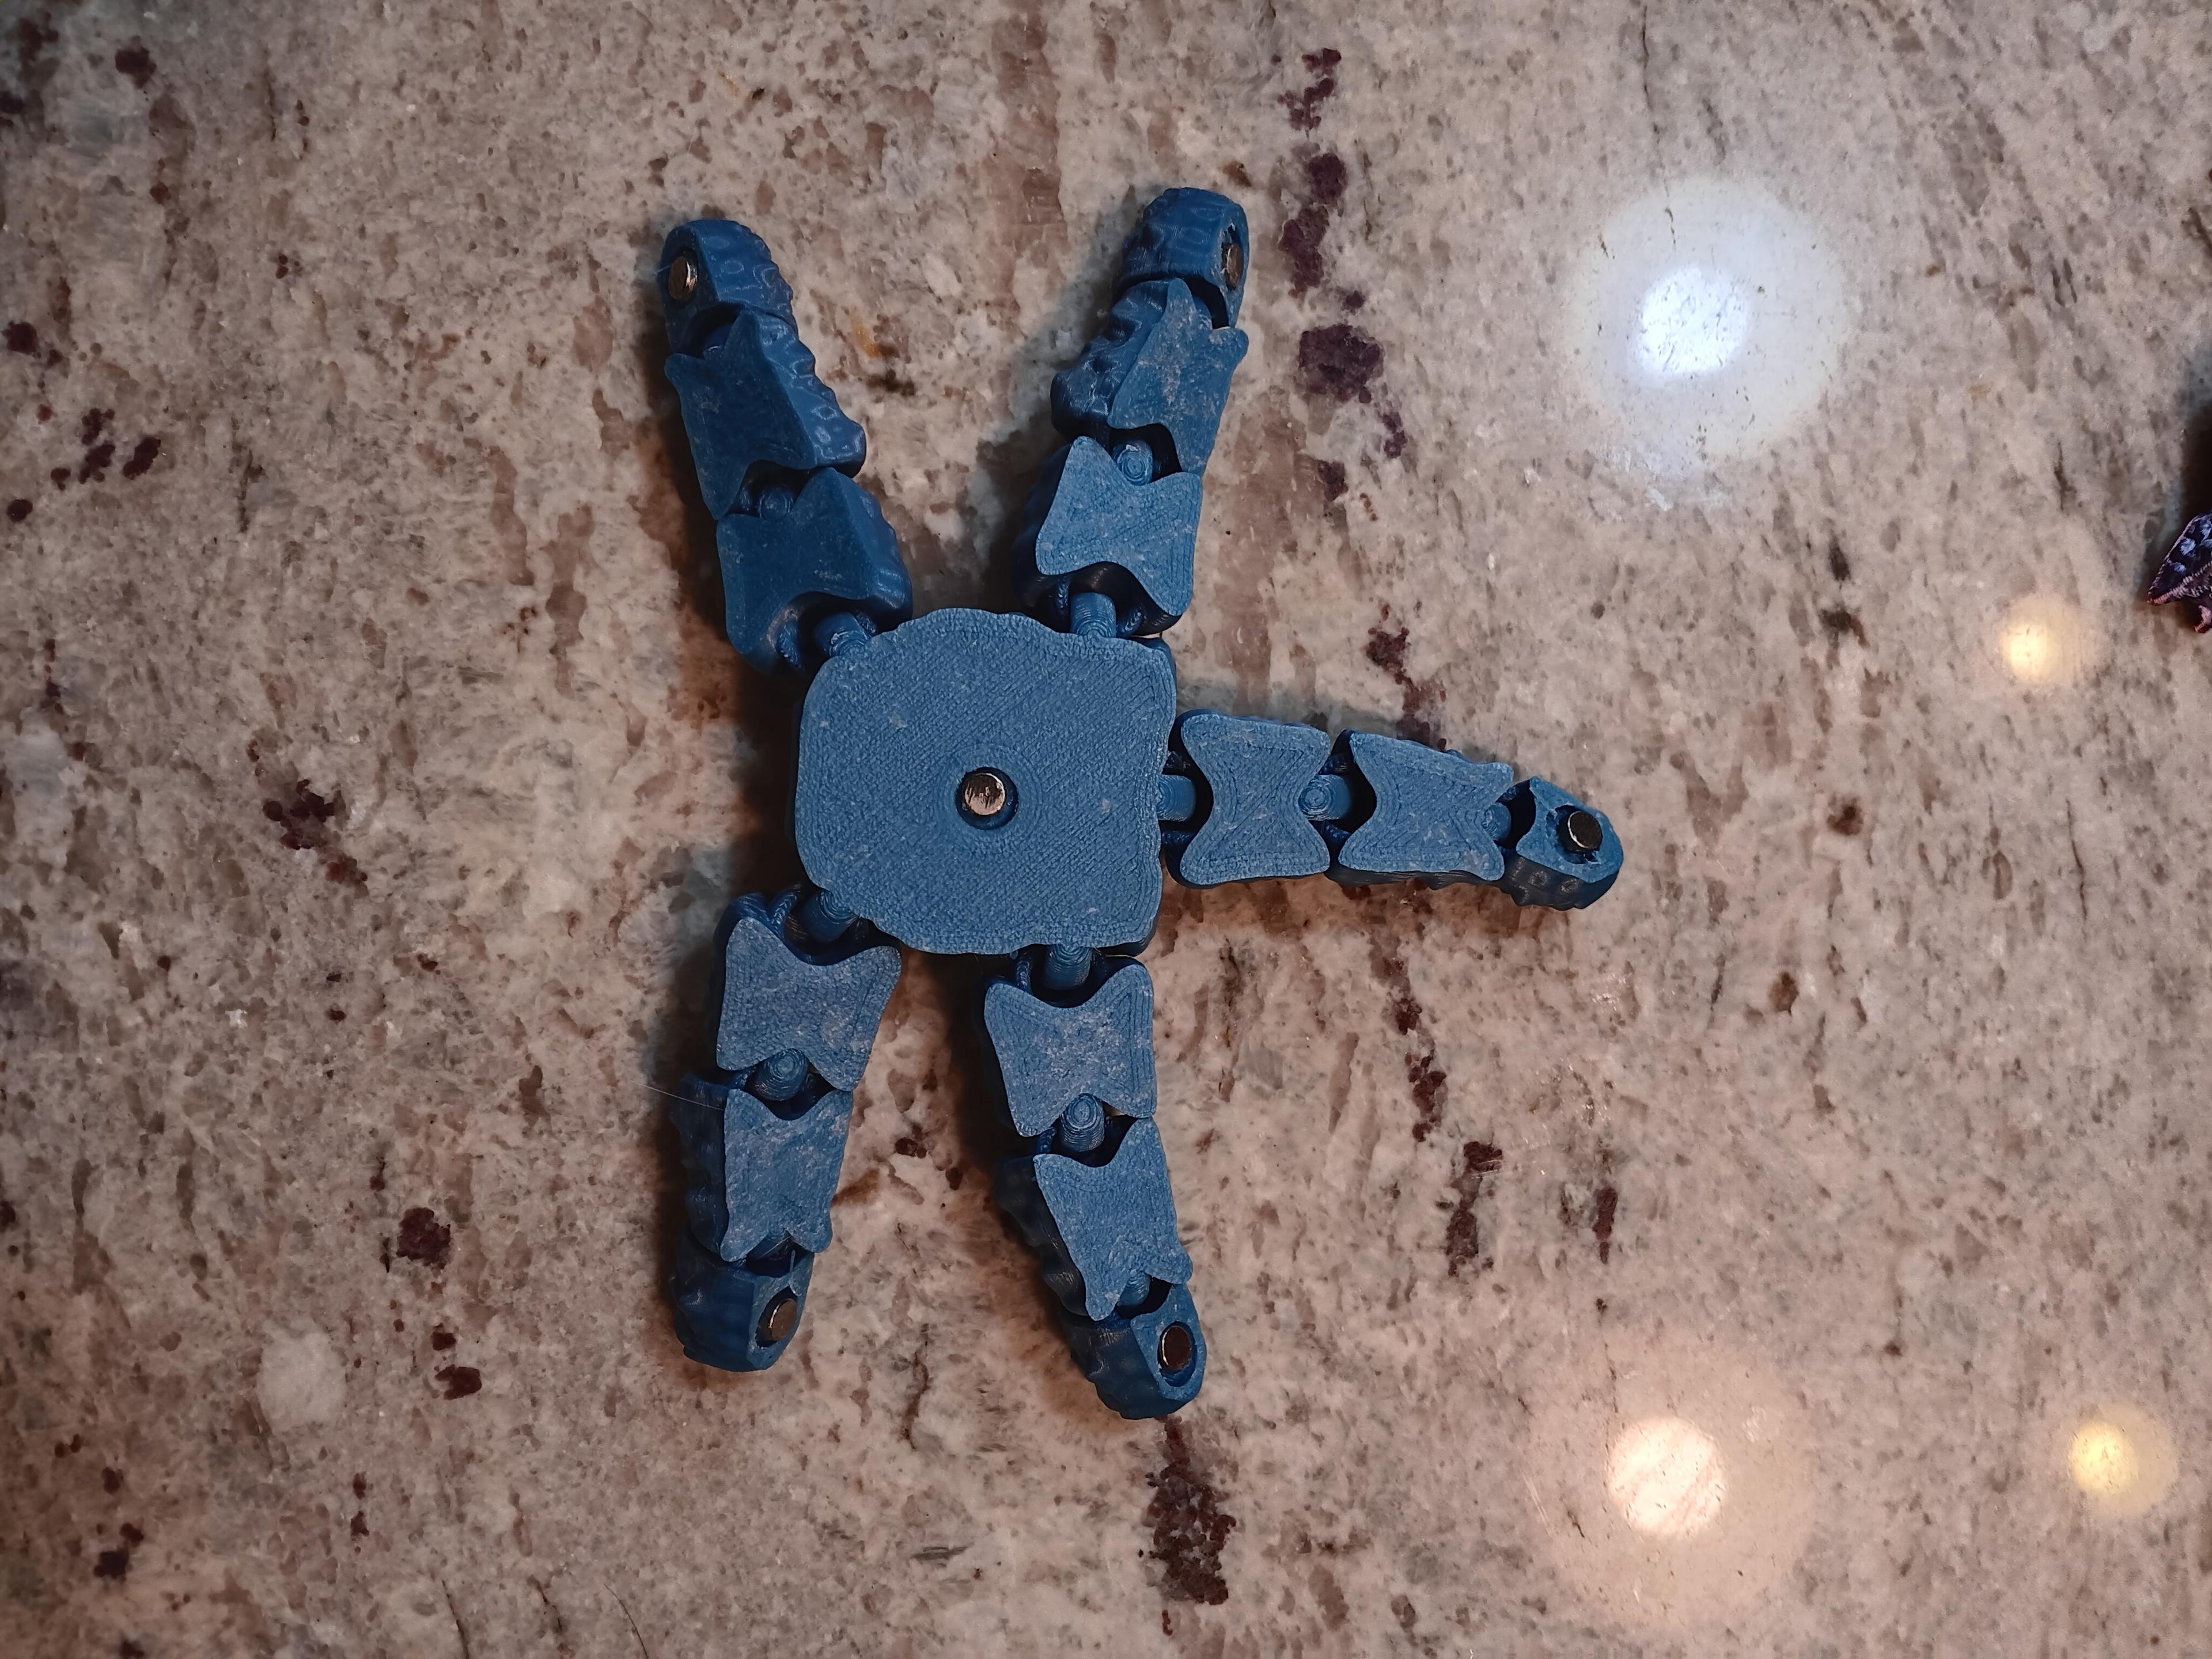 flexi Starfish kitchen magnet - print in place - flexi fidget toy - articulated 3d model